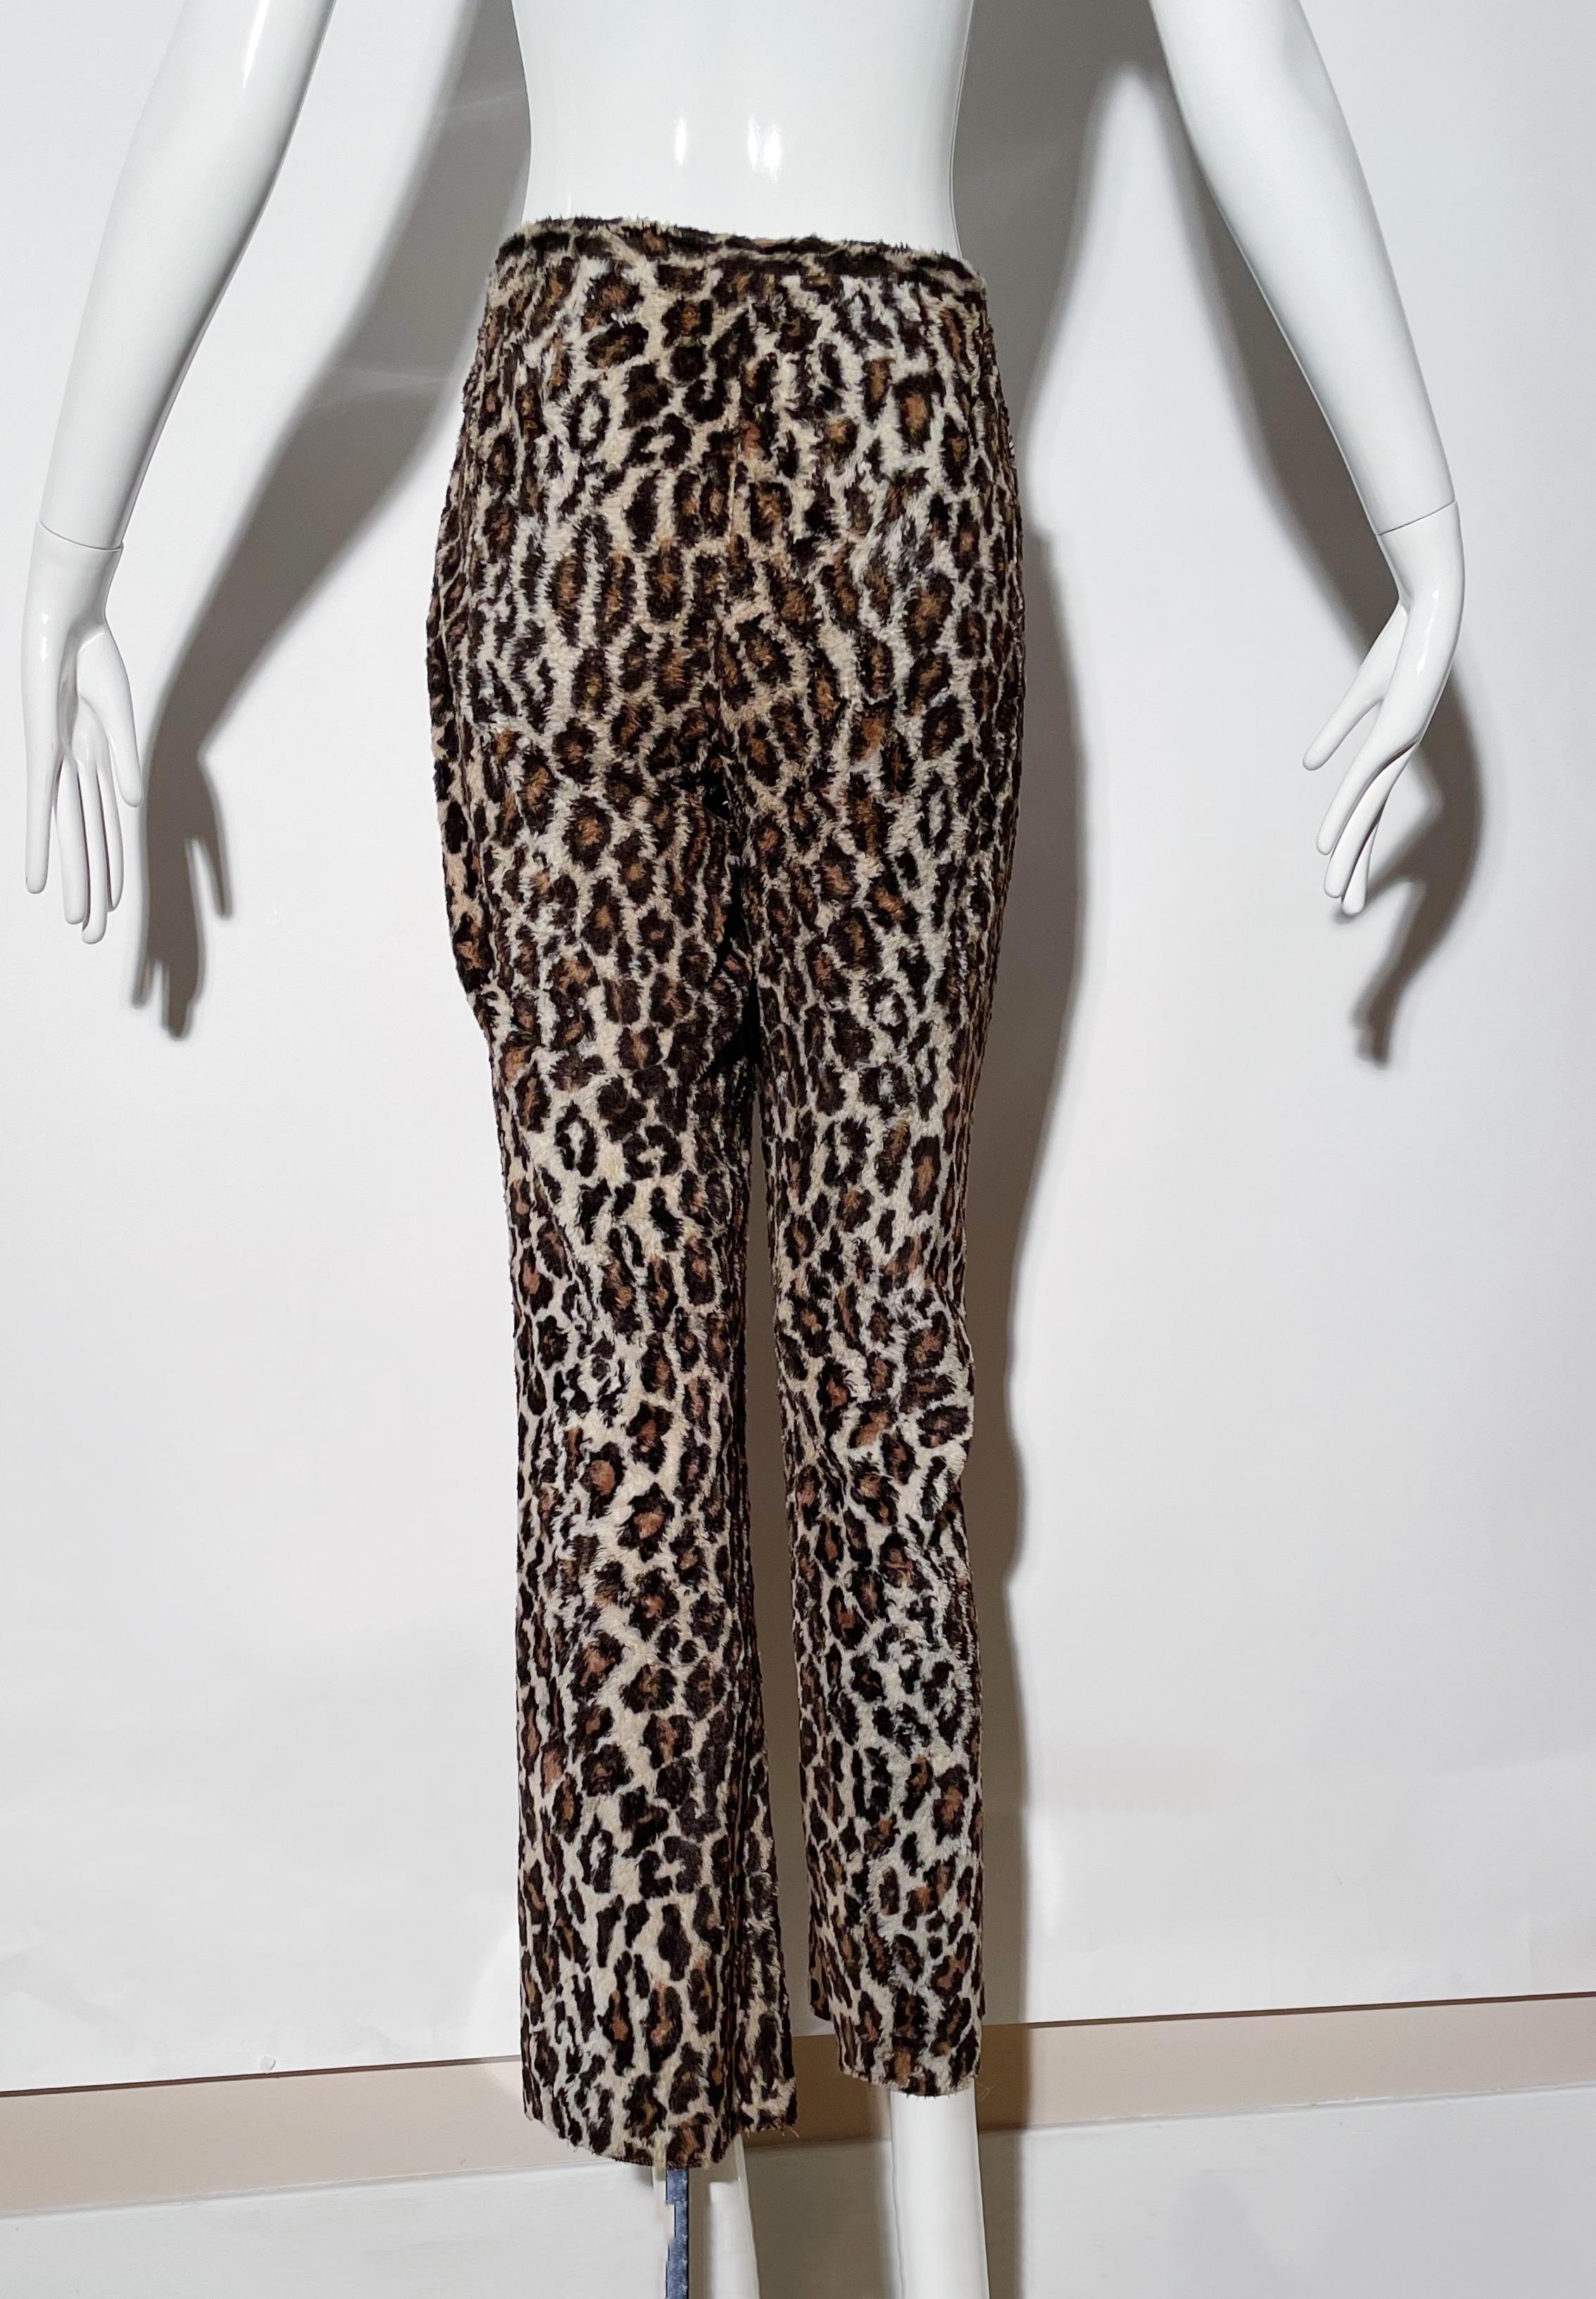 Dolce & Gabbana Fuzzy Leopard Print Pants  In Excellent Condition For Sale In Waterford, MI